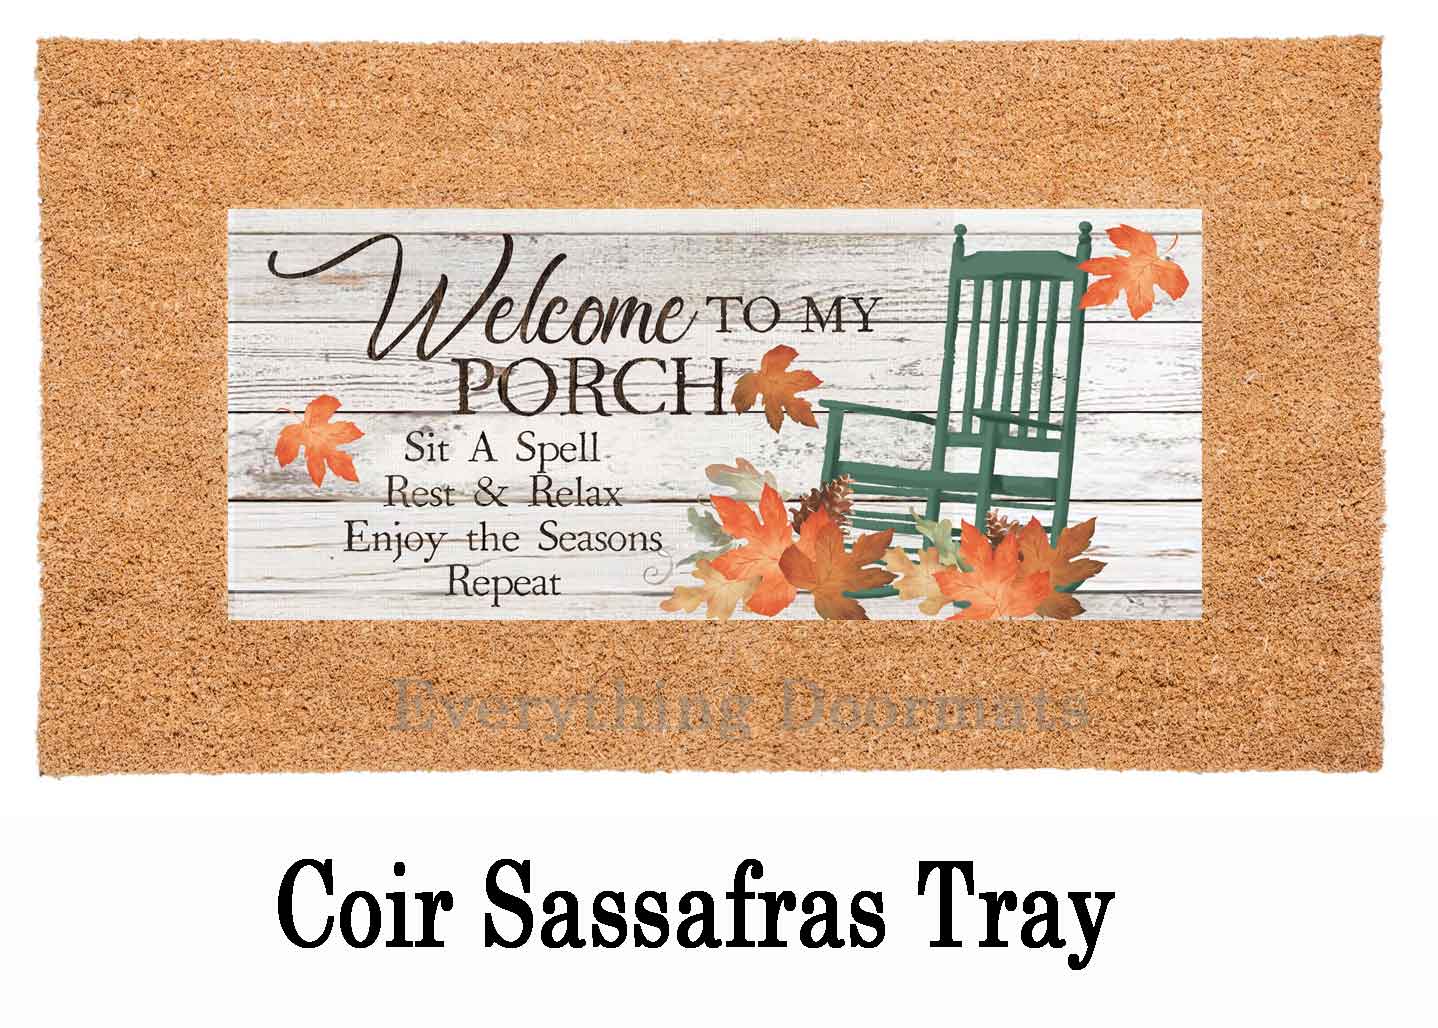 https://www.everythingdoormats.com/images/products/fall-porch-rules-welcome-sassafras-switch-insert-in-coir-inset-tray.jpg